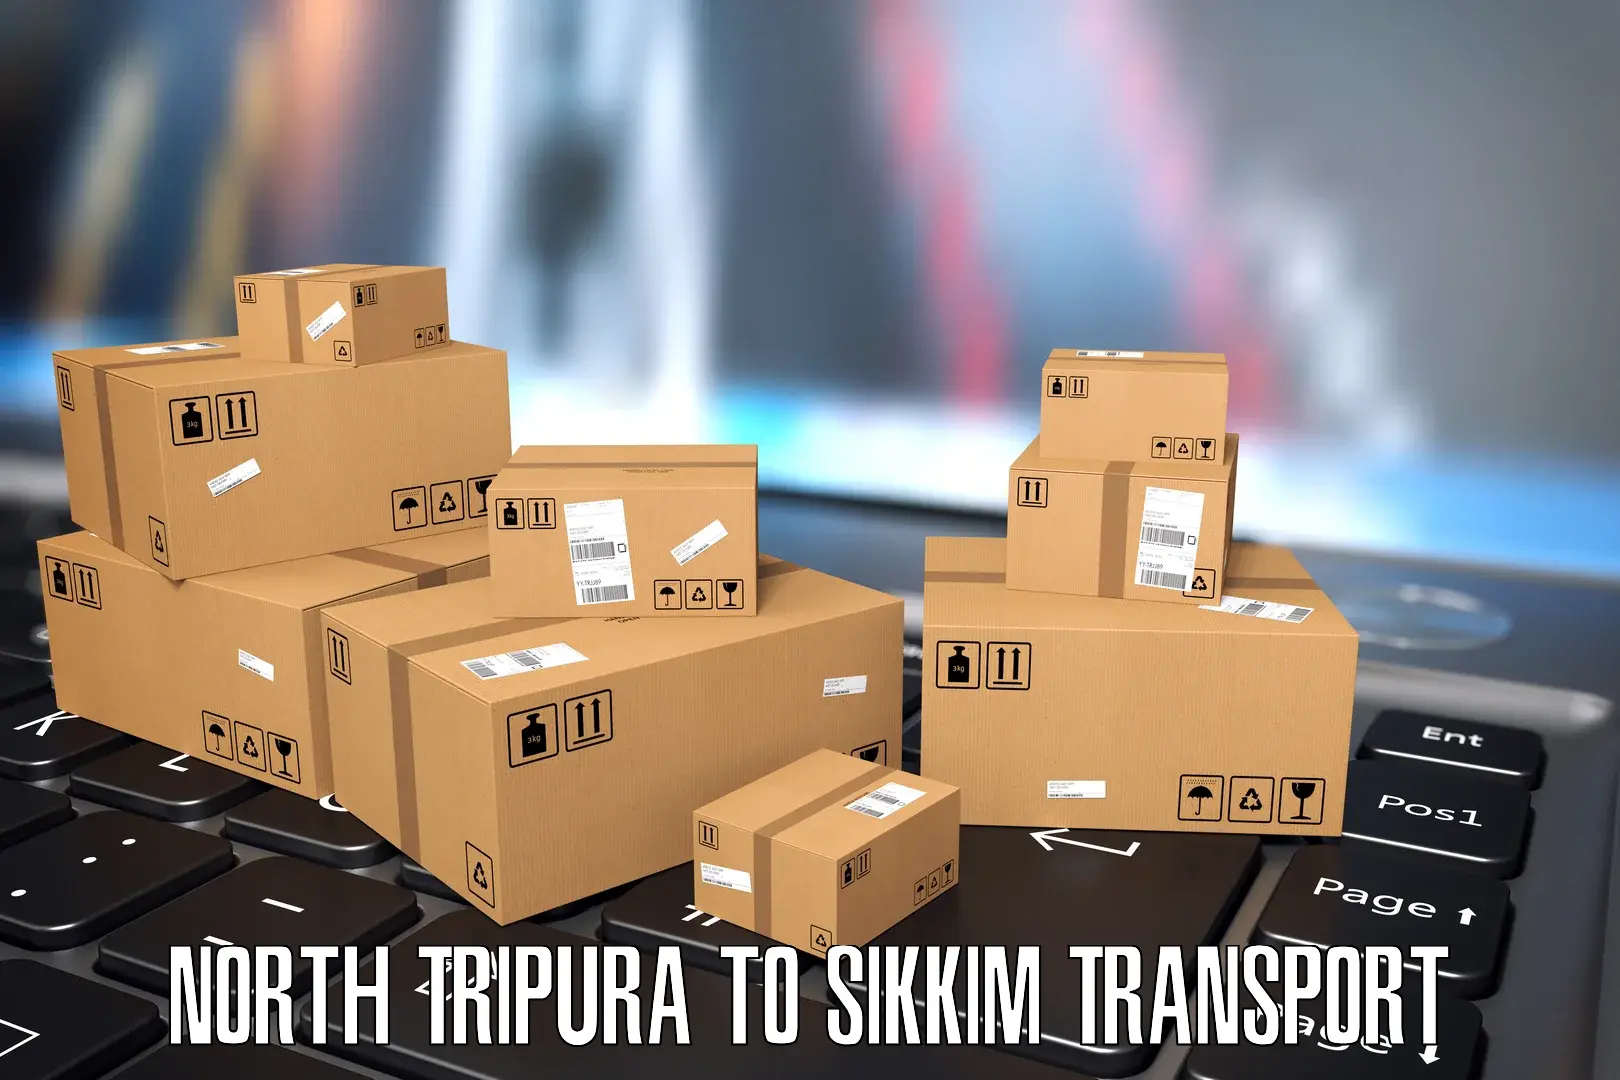 Express transport services in North Tripura to Sikkim